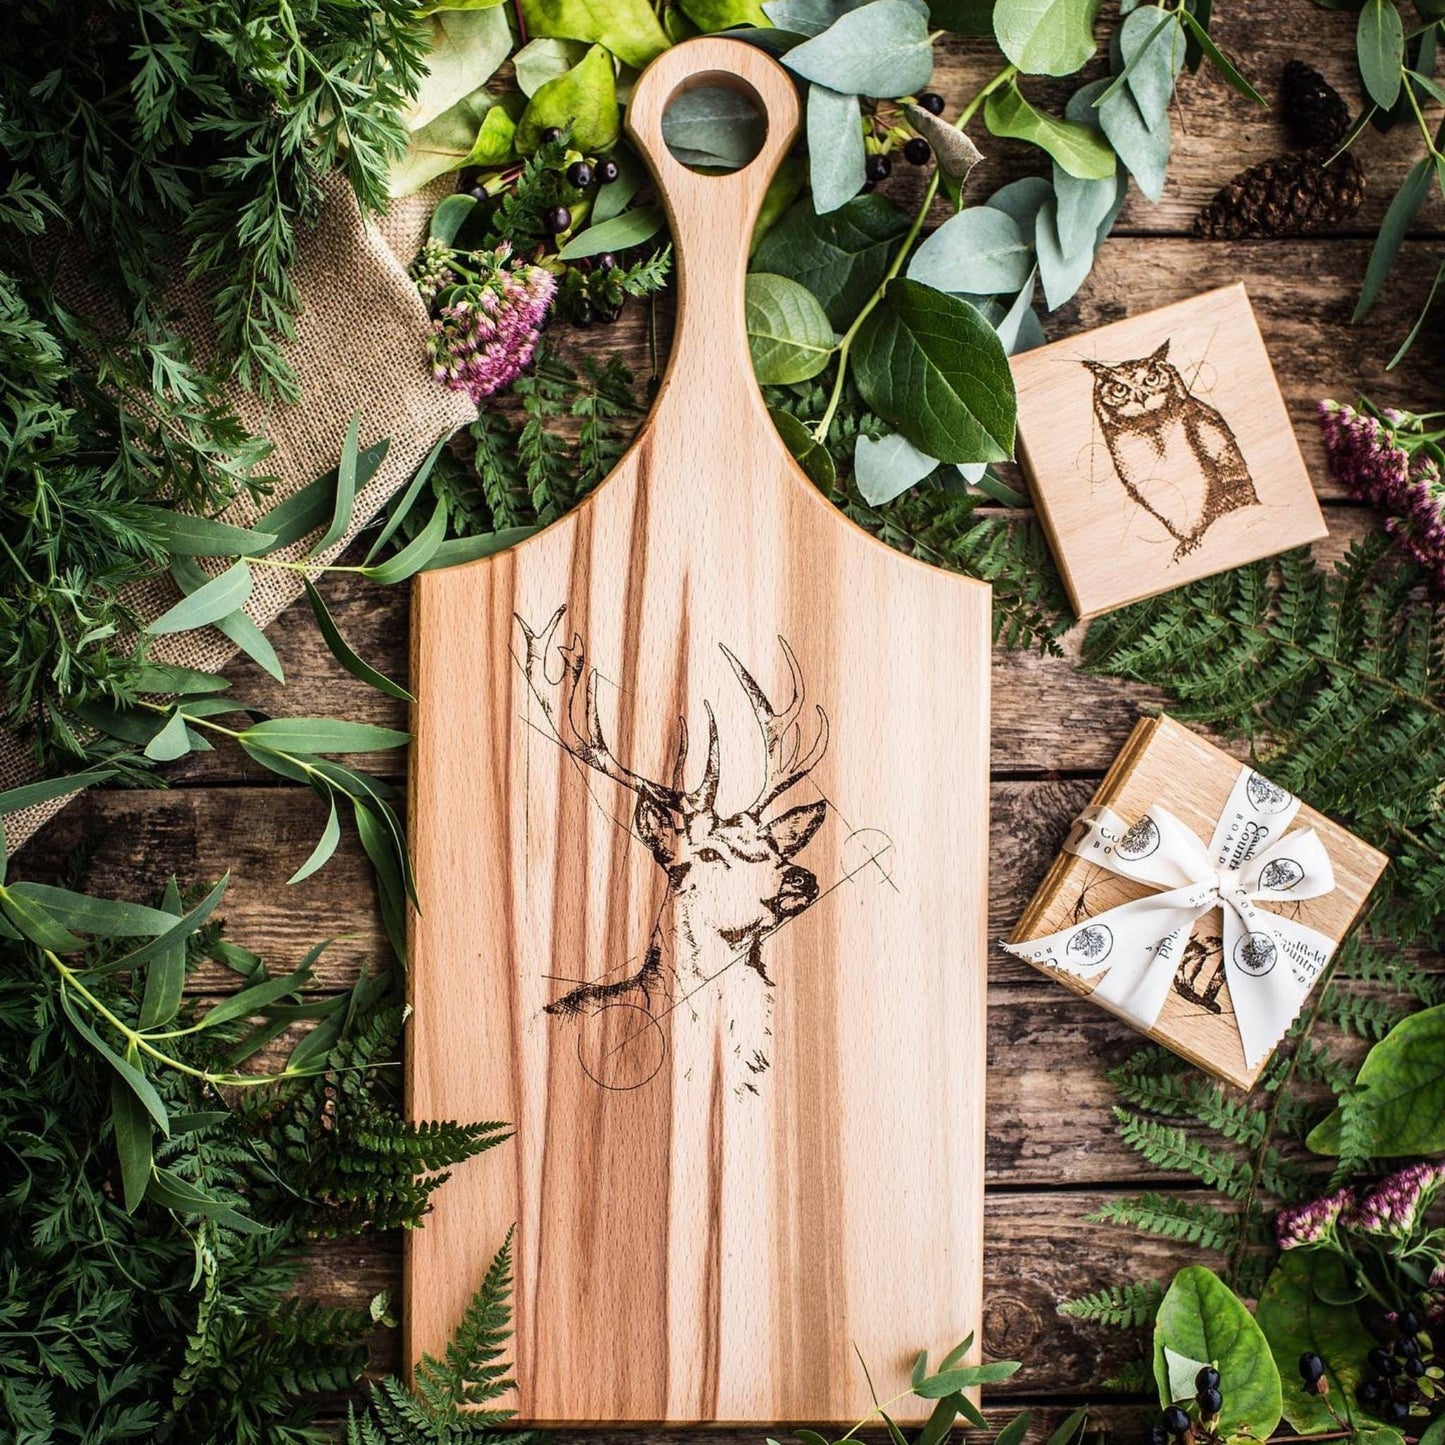 Caulfield Country Boards Homewares The Native Collection Stag - Caulfield Country Boards